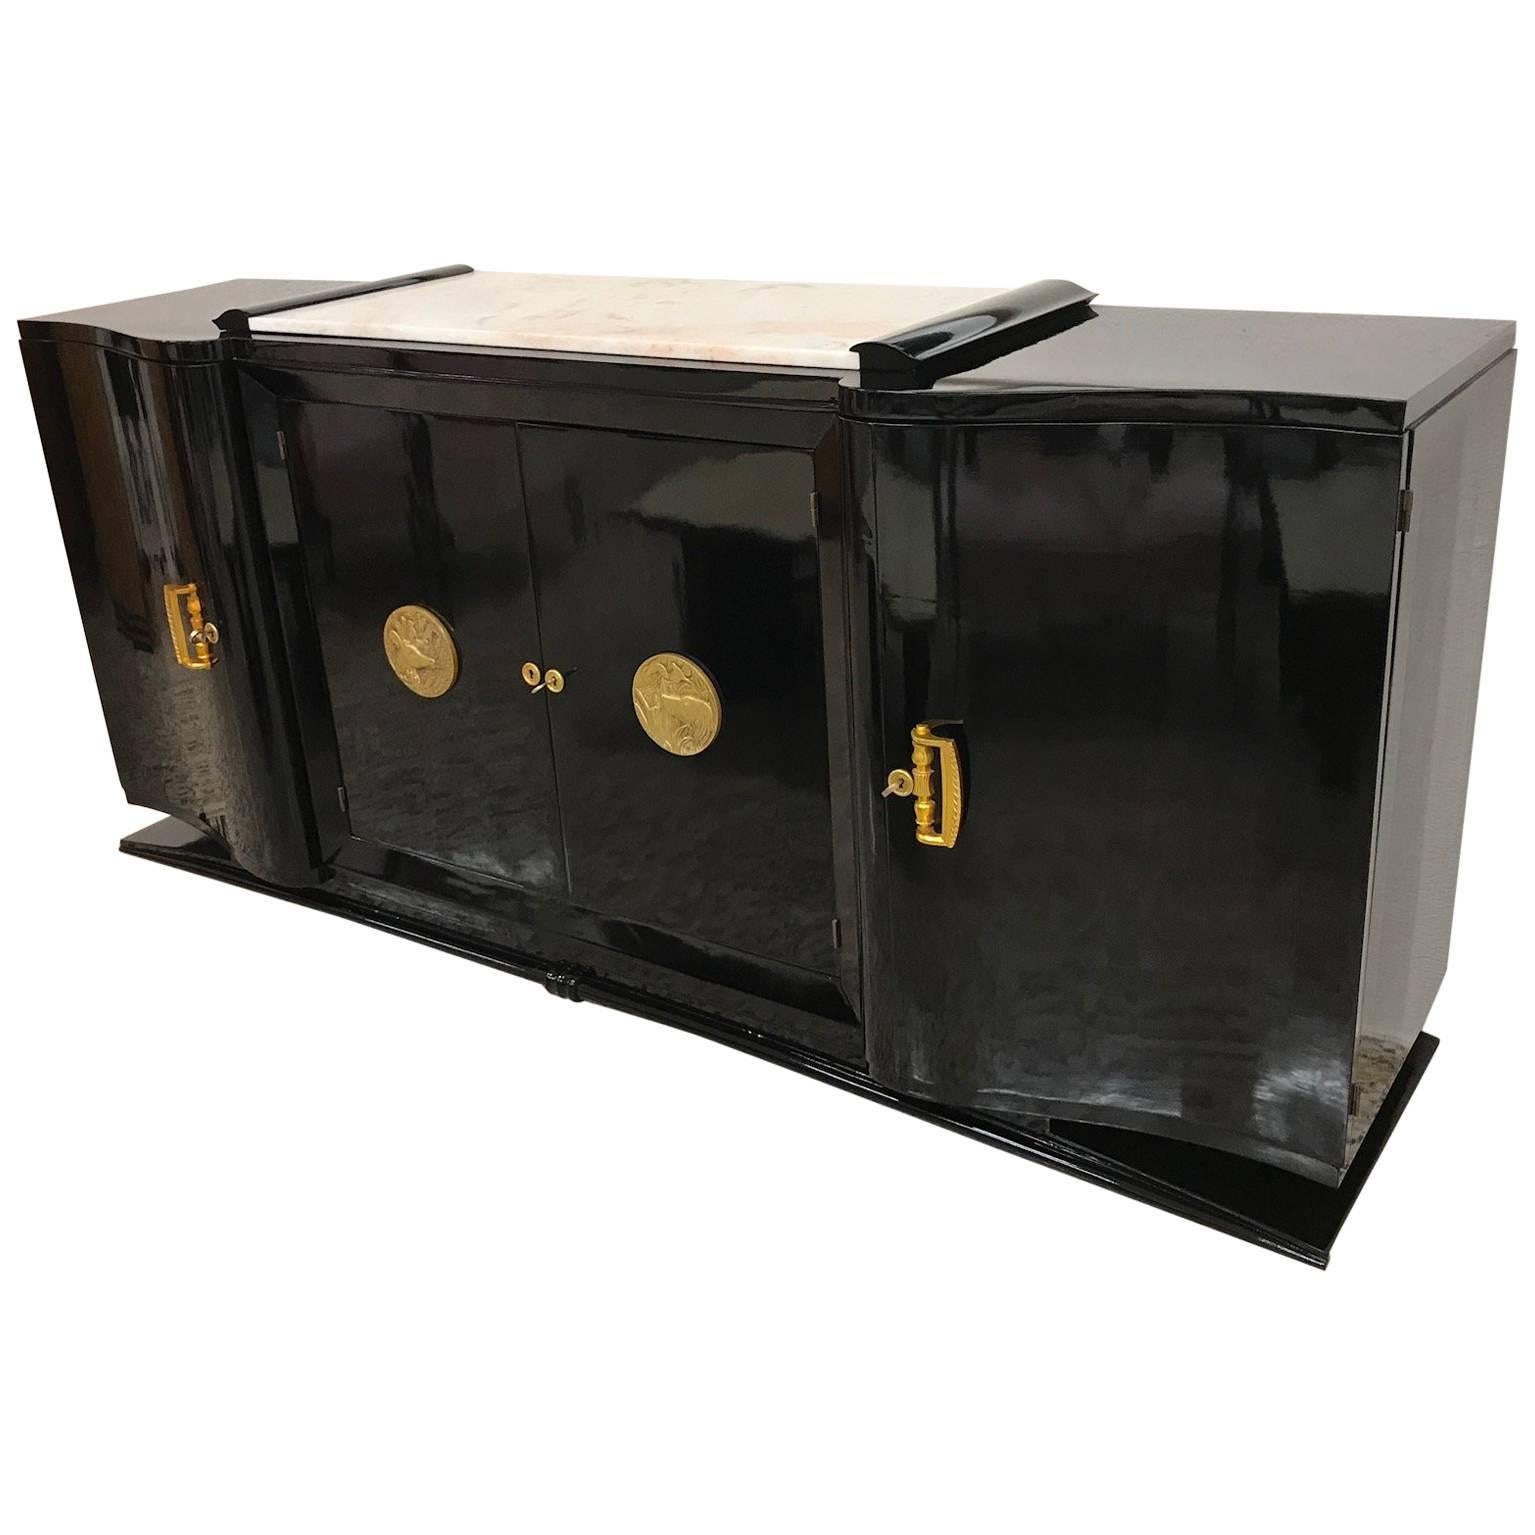 1930s French Art Deco Black Lacquered Sideboard